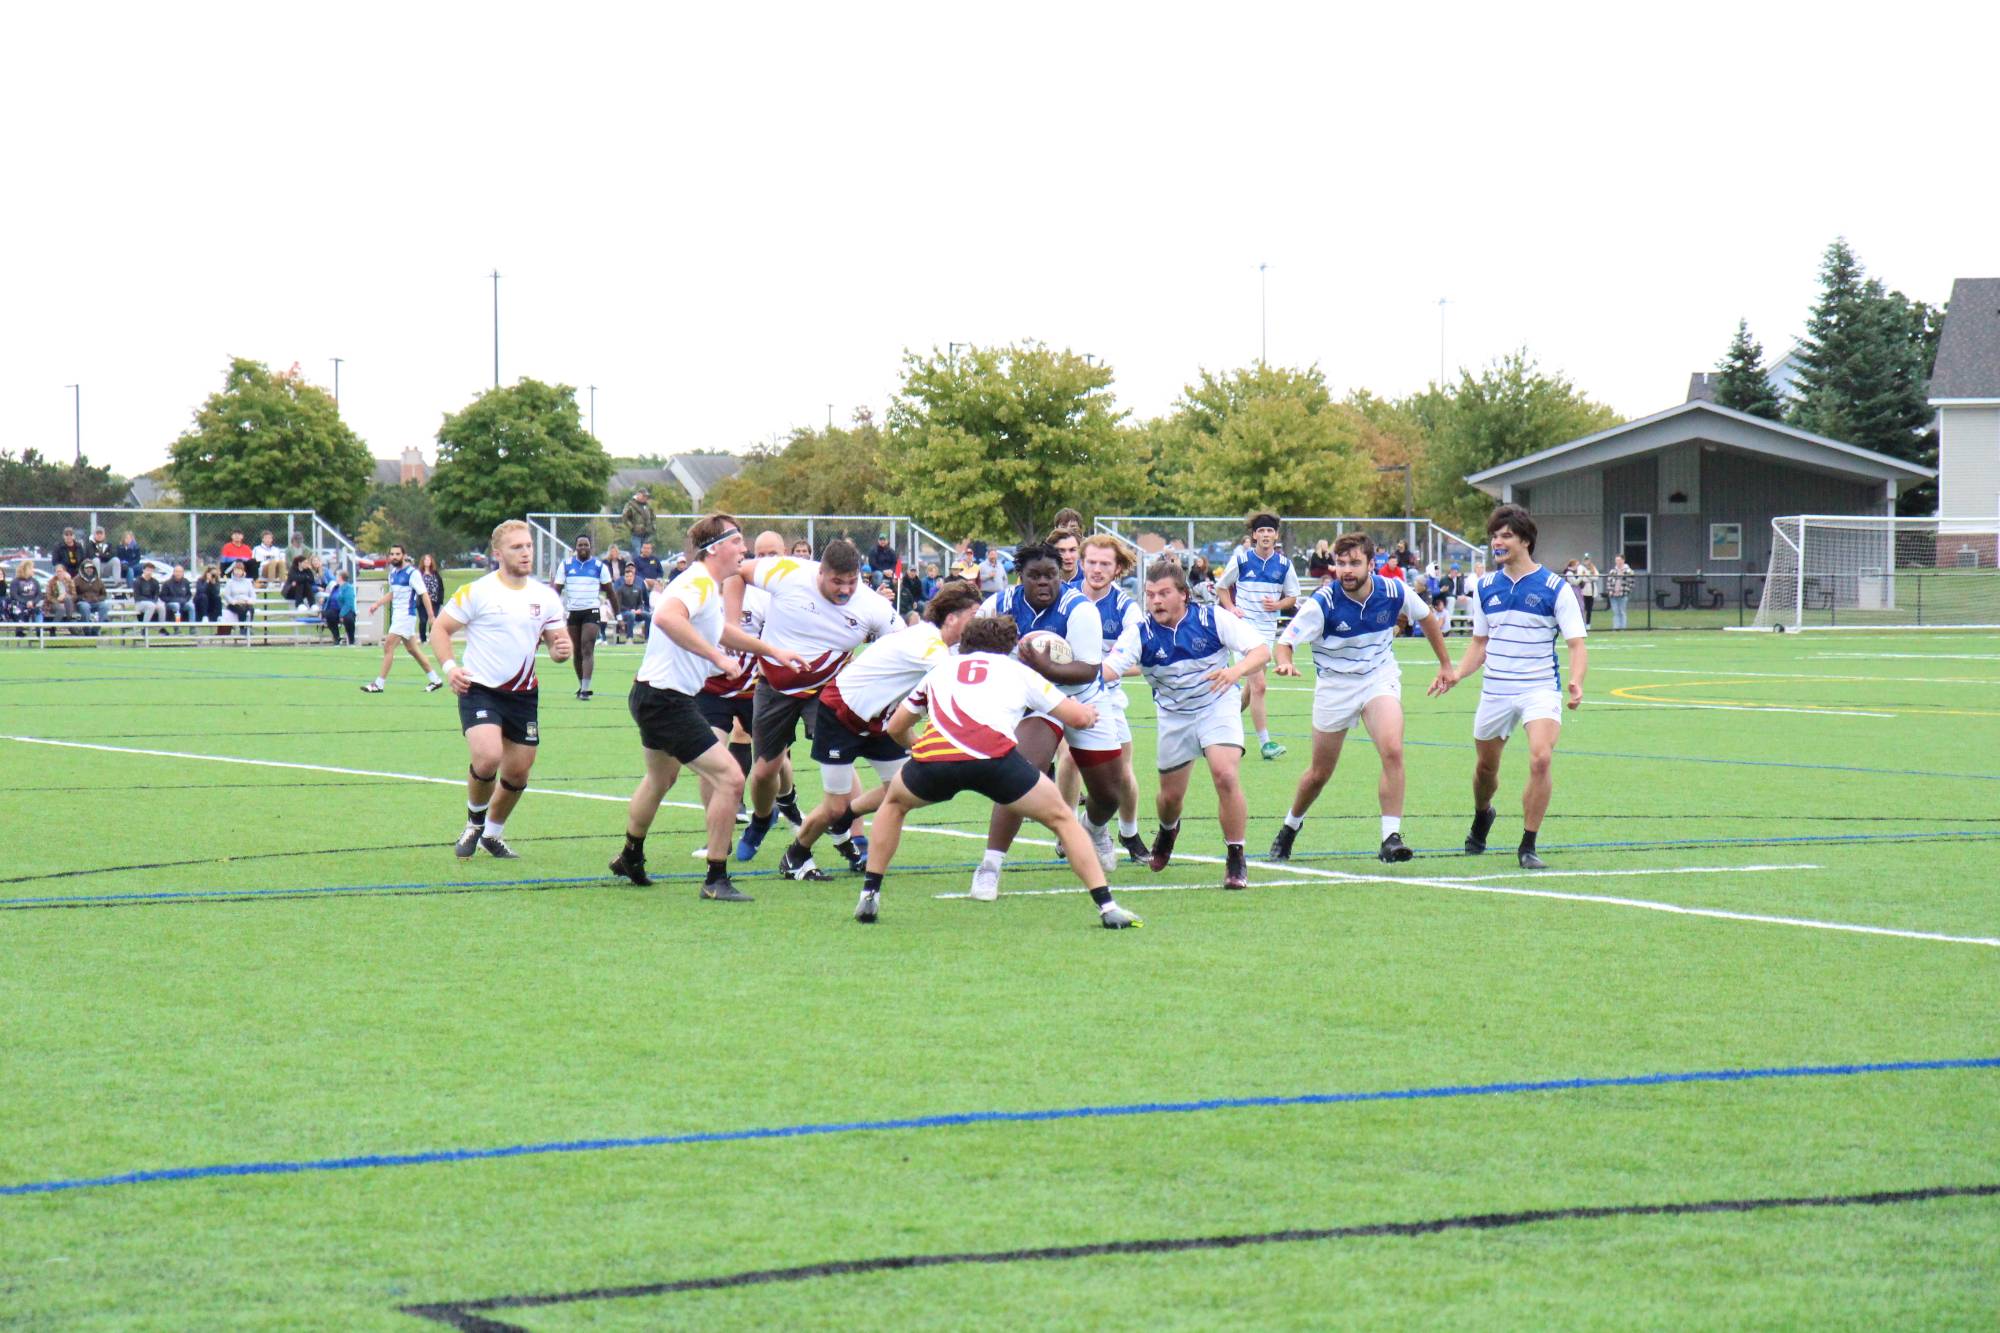 mens rugby player holding the ball running into the opposing team braced for impact. teammates running behind him to support